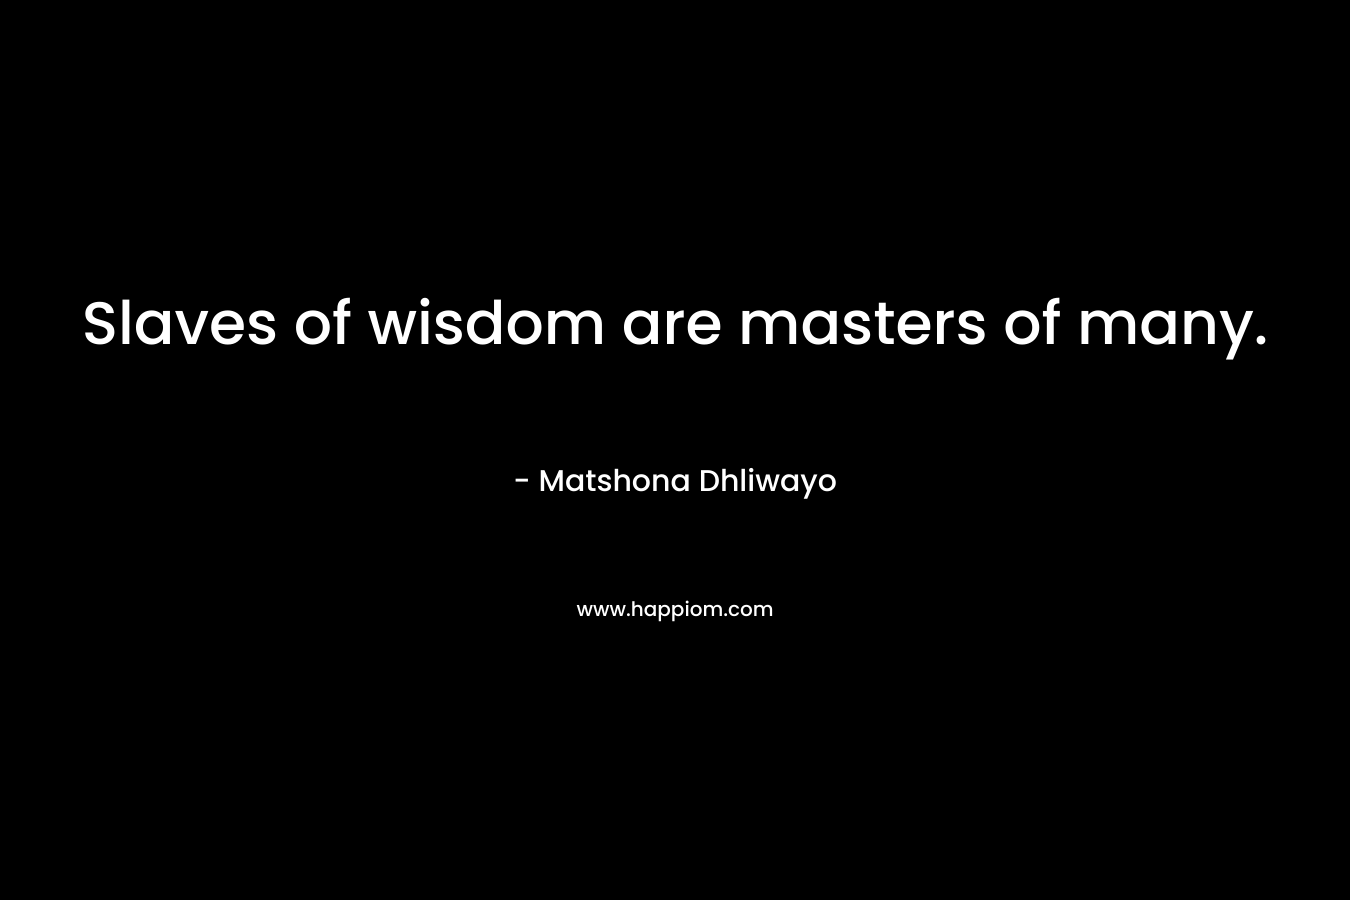 Slaves of wisdom are masters of many.